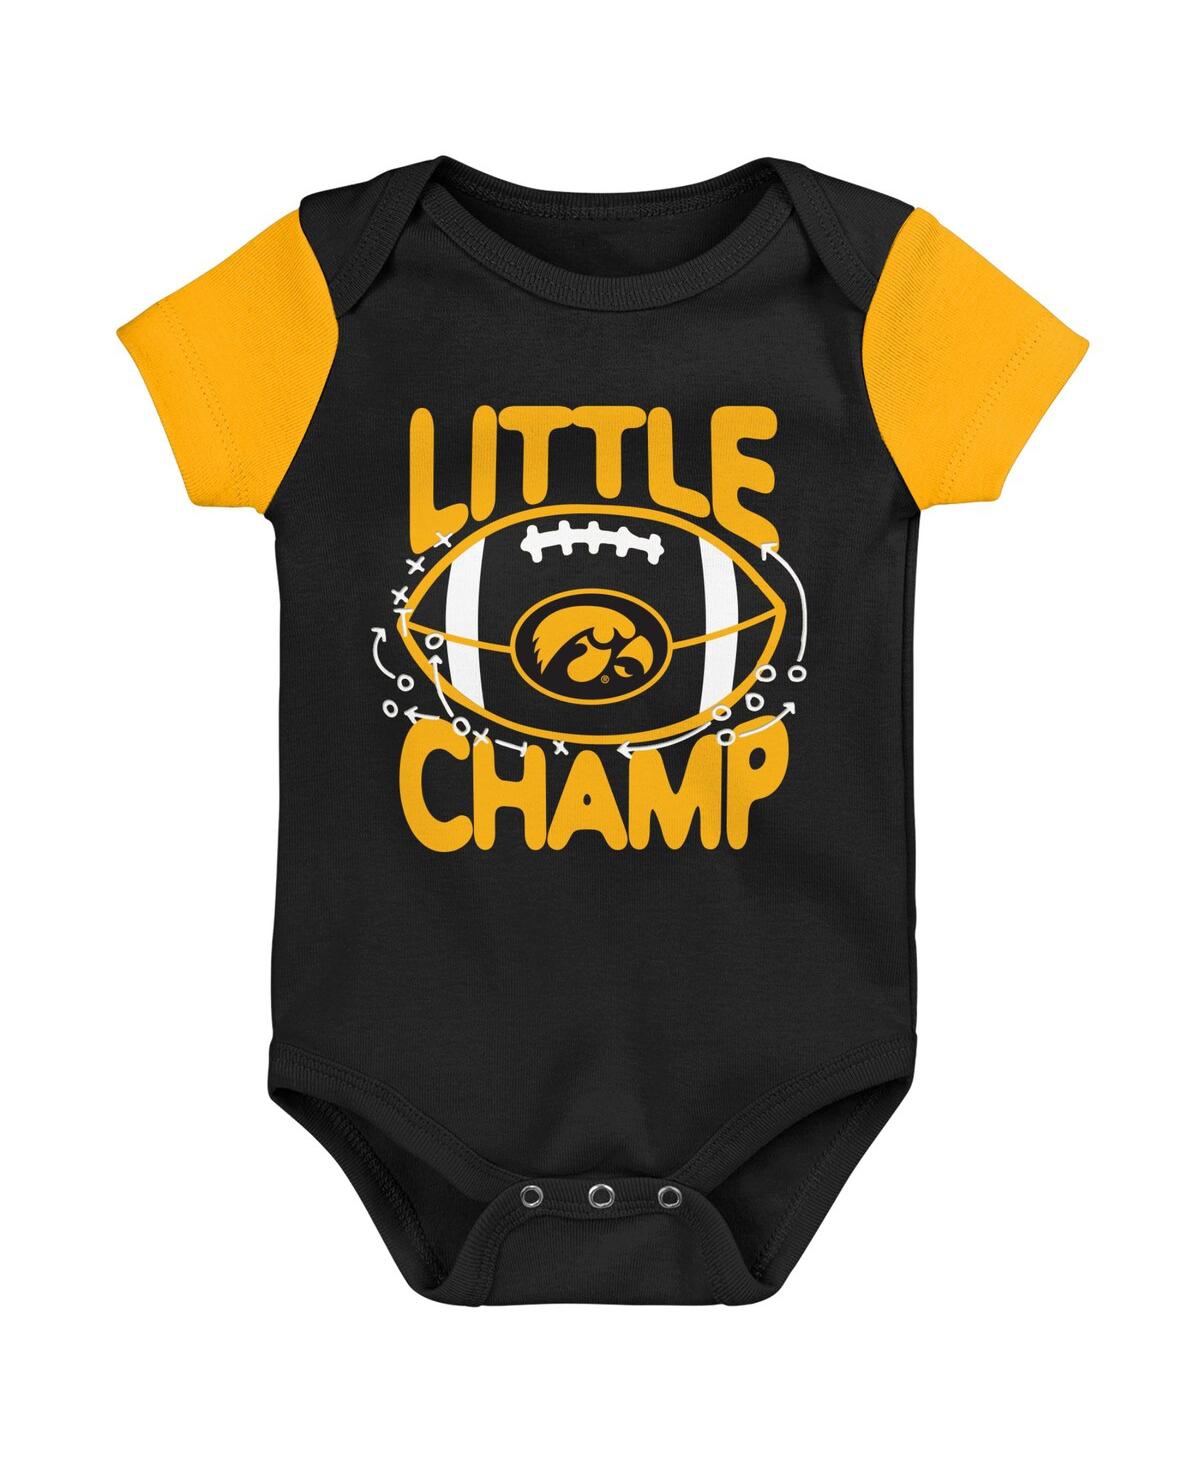 Shop Outerstuff Newborn And Infant Boys And Girls Black, Gold Iowa Hawkeyes Little Champ Bodysuit Bib And Booties Se In Black,gold